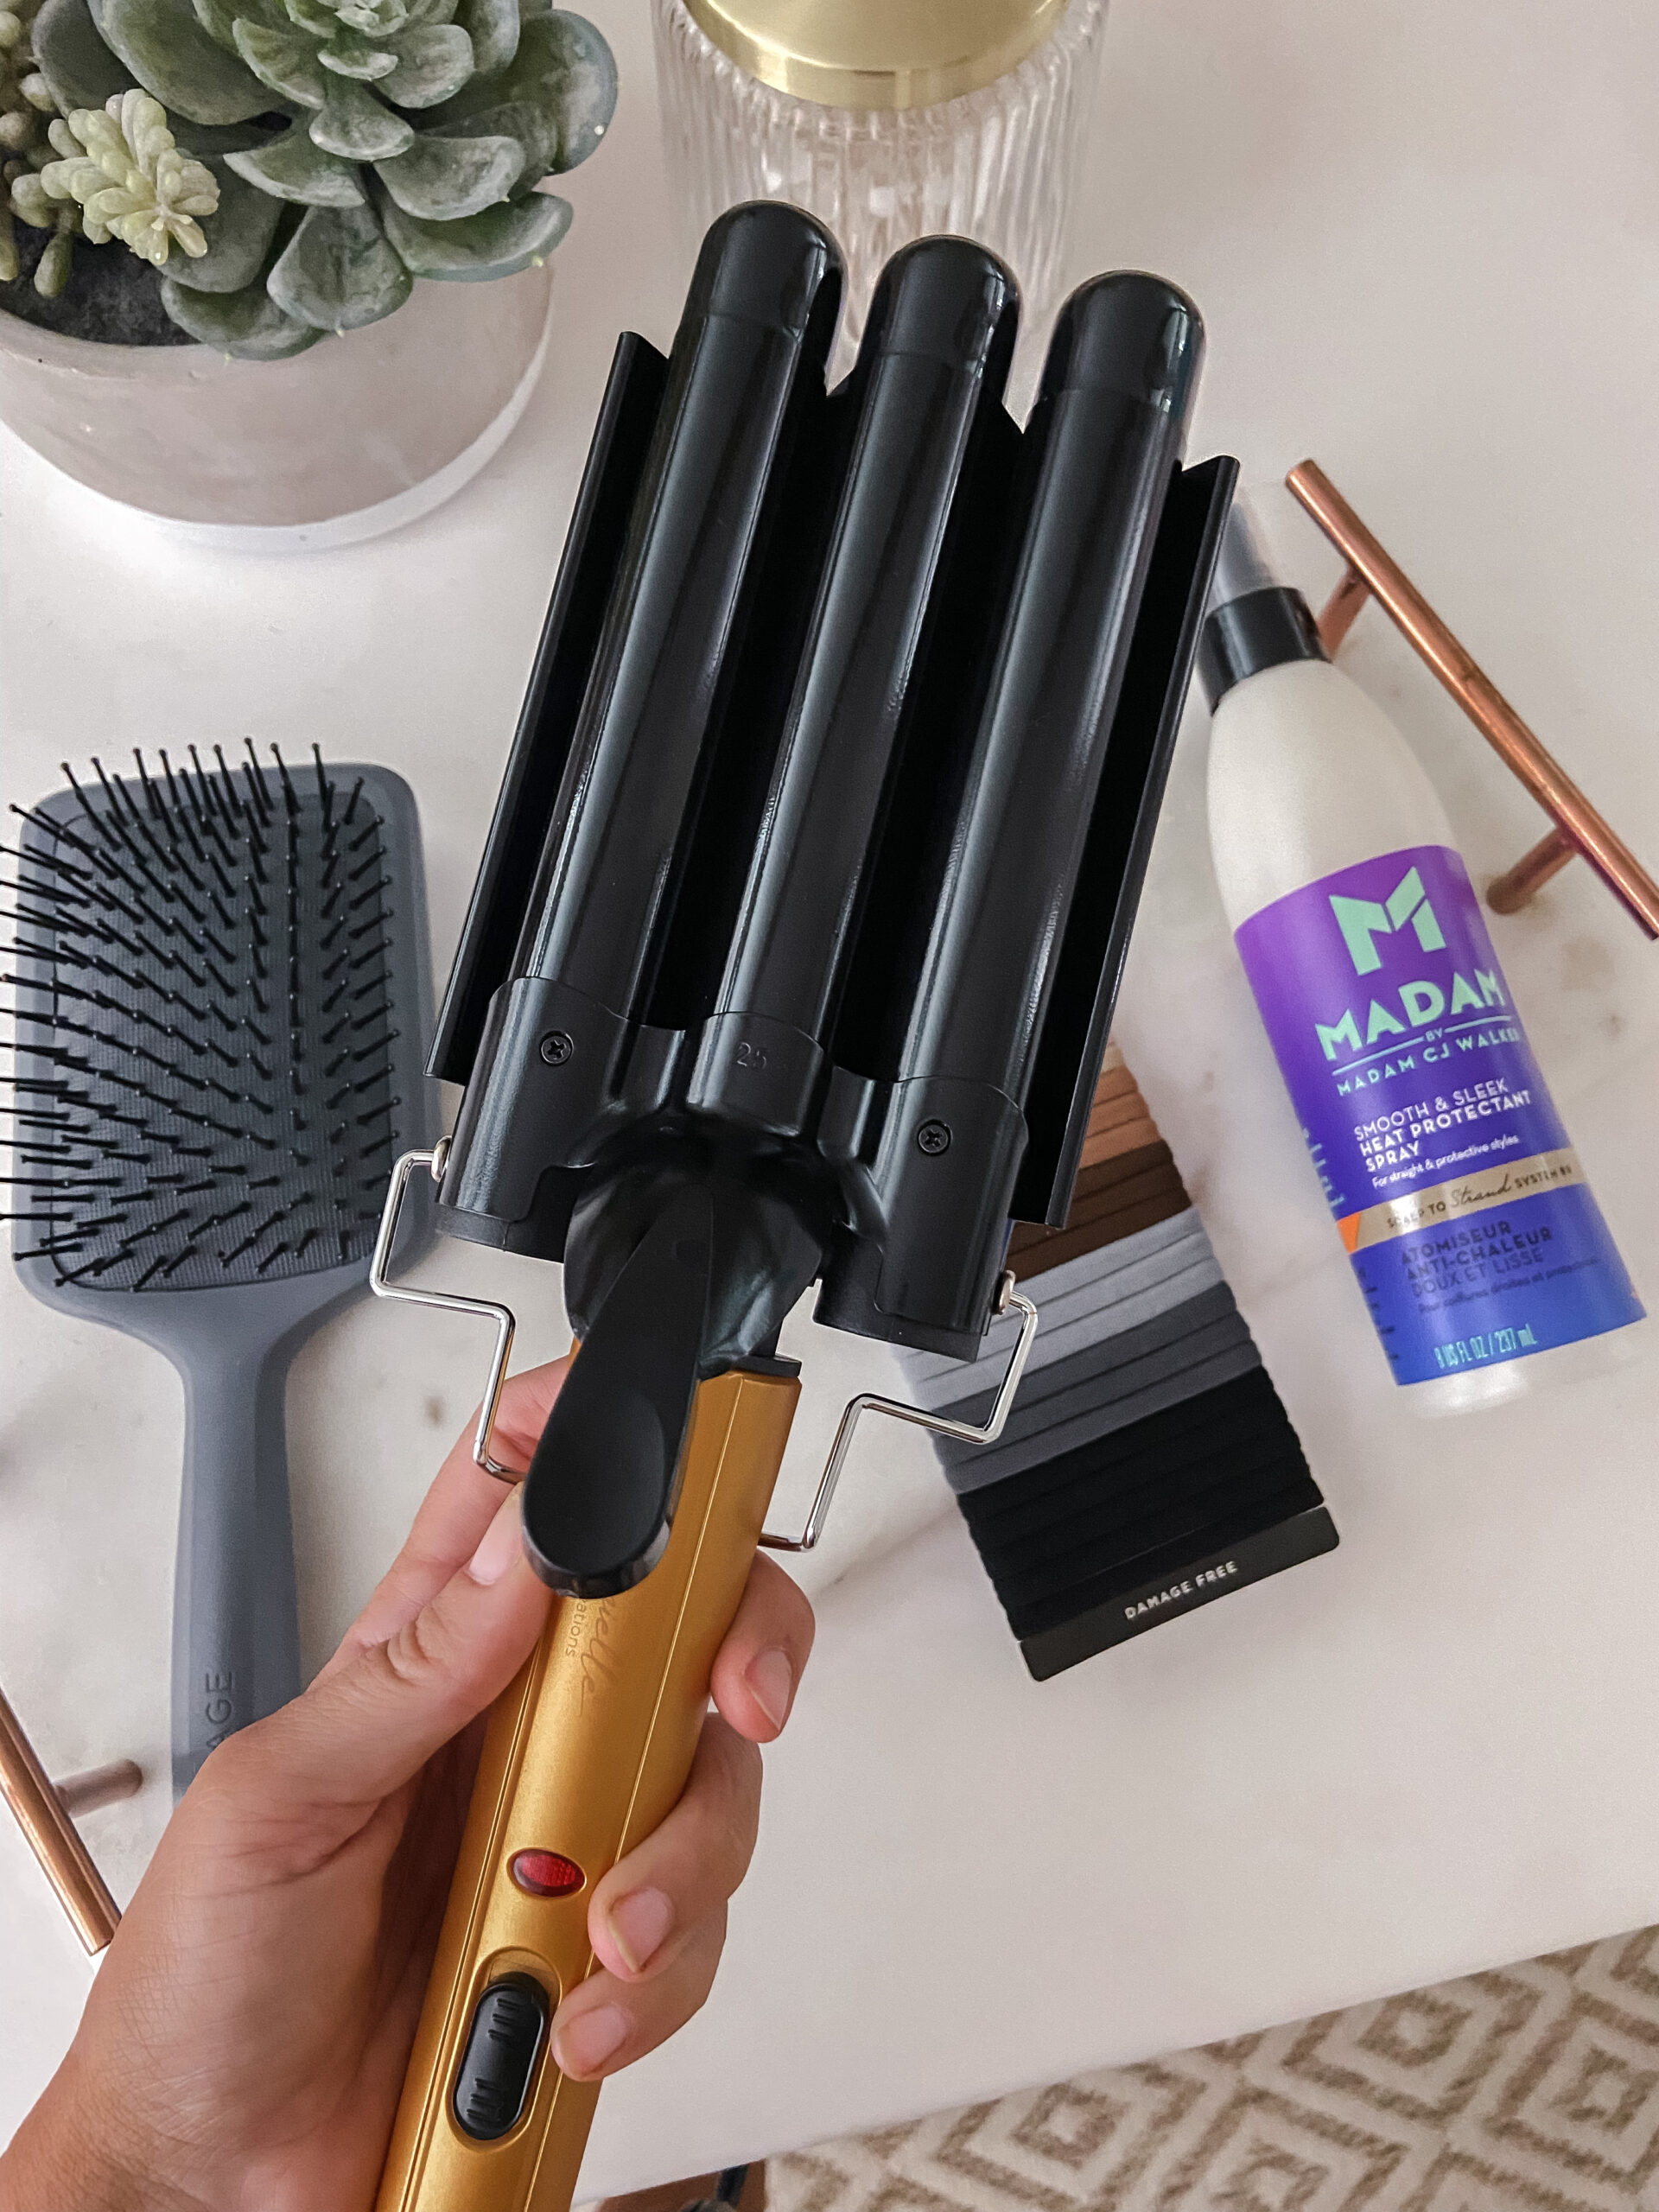 SUMMER HAIR REFRESH WITH WALMART-Jaclyn De Leon Style. Hair waver from Walmart creates fun and easy beach waves in minutes. Super affordable hair waver for fun hairstyles from Walmart.